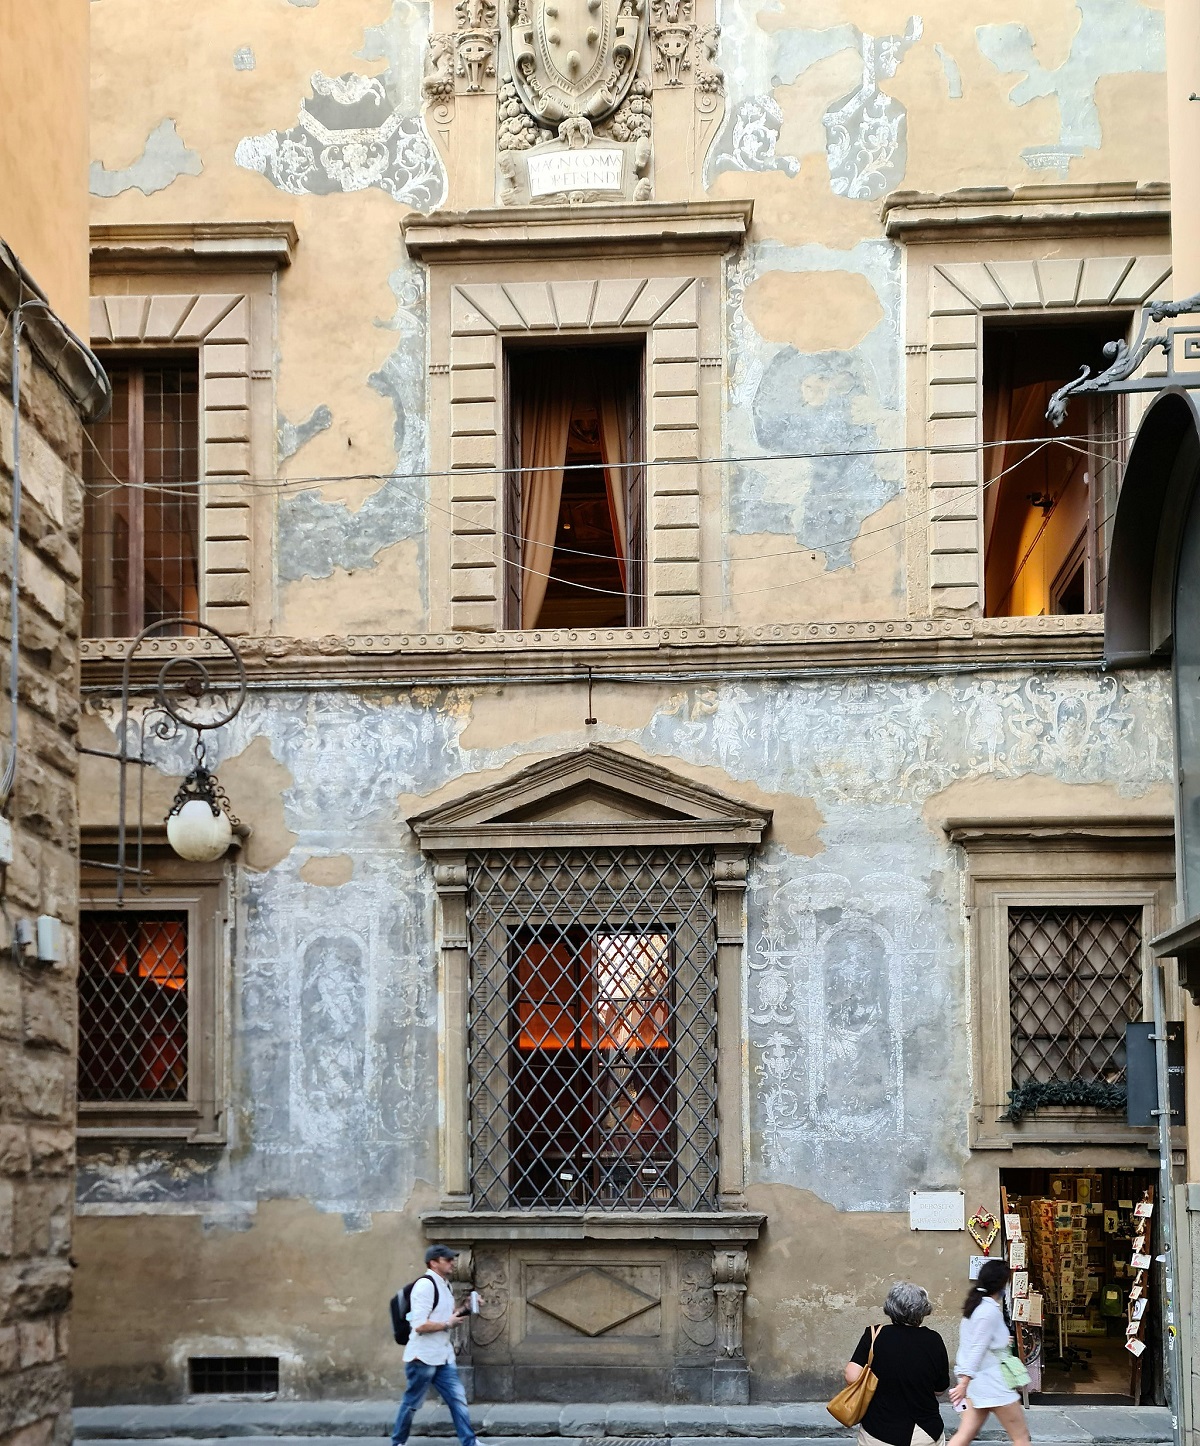 The facade of the Palazzo Pandolfini in the center of Florence